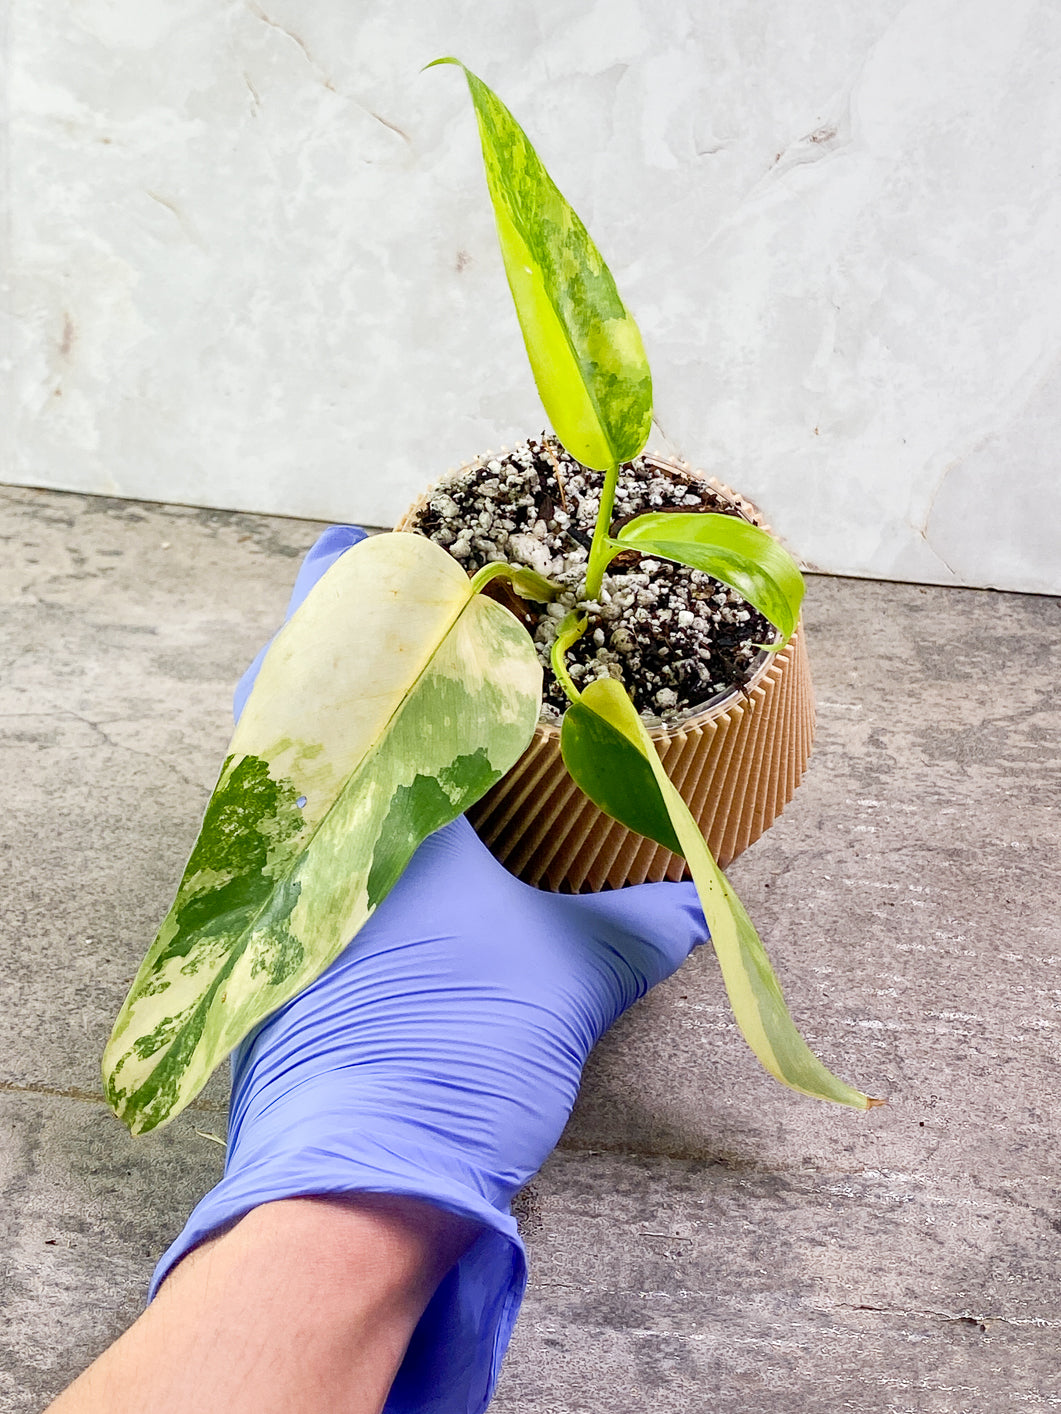 COMBO DEAL: Philodendron White Princess Tricolor and Philodendron Domesticum Variegated nodes with new growth